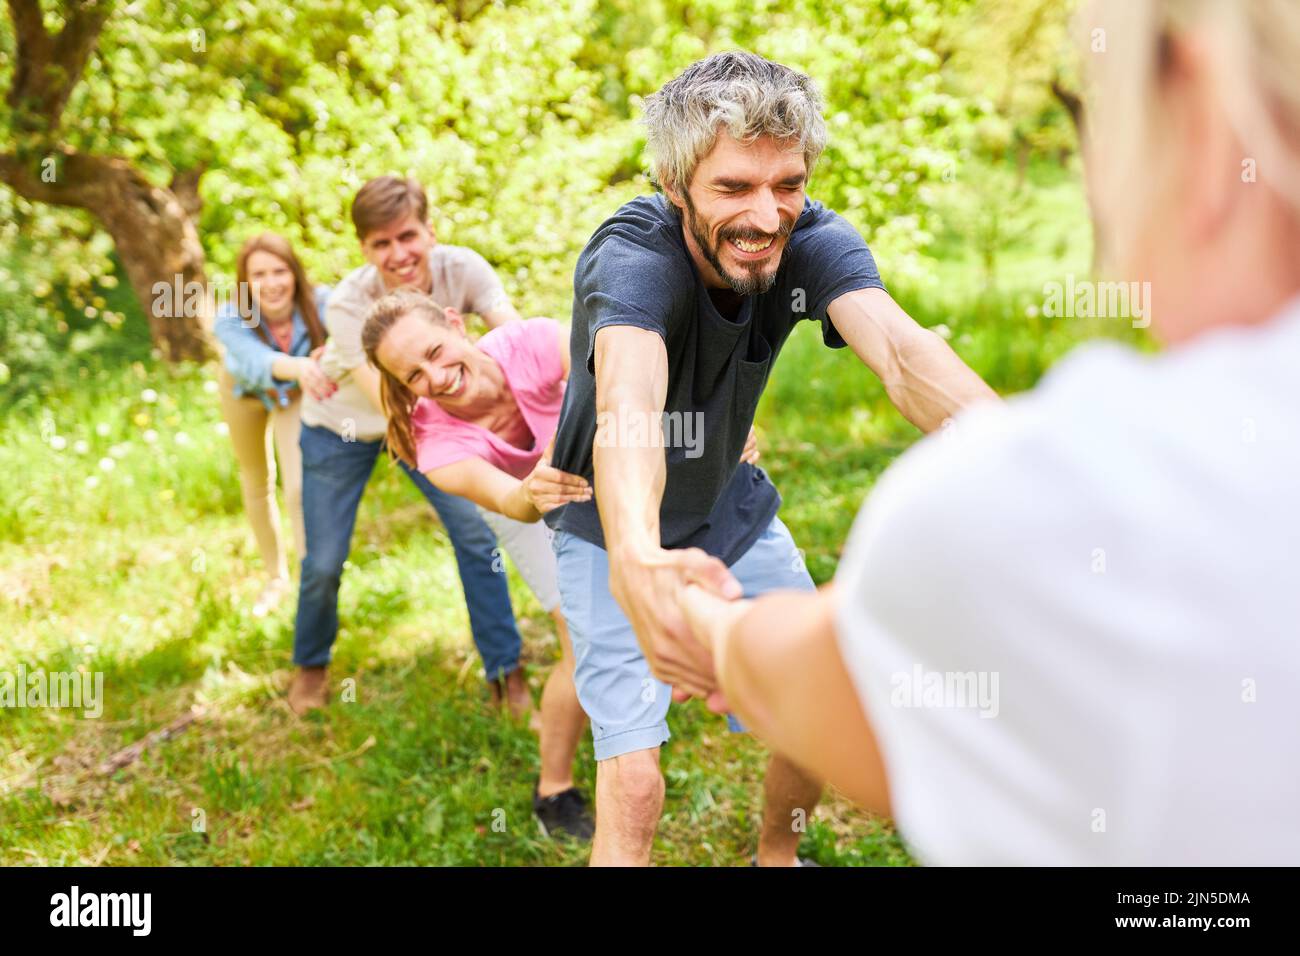 Young people pull hands during a showdown at the outdoor team event Stock Photo